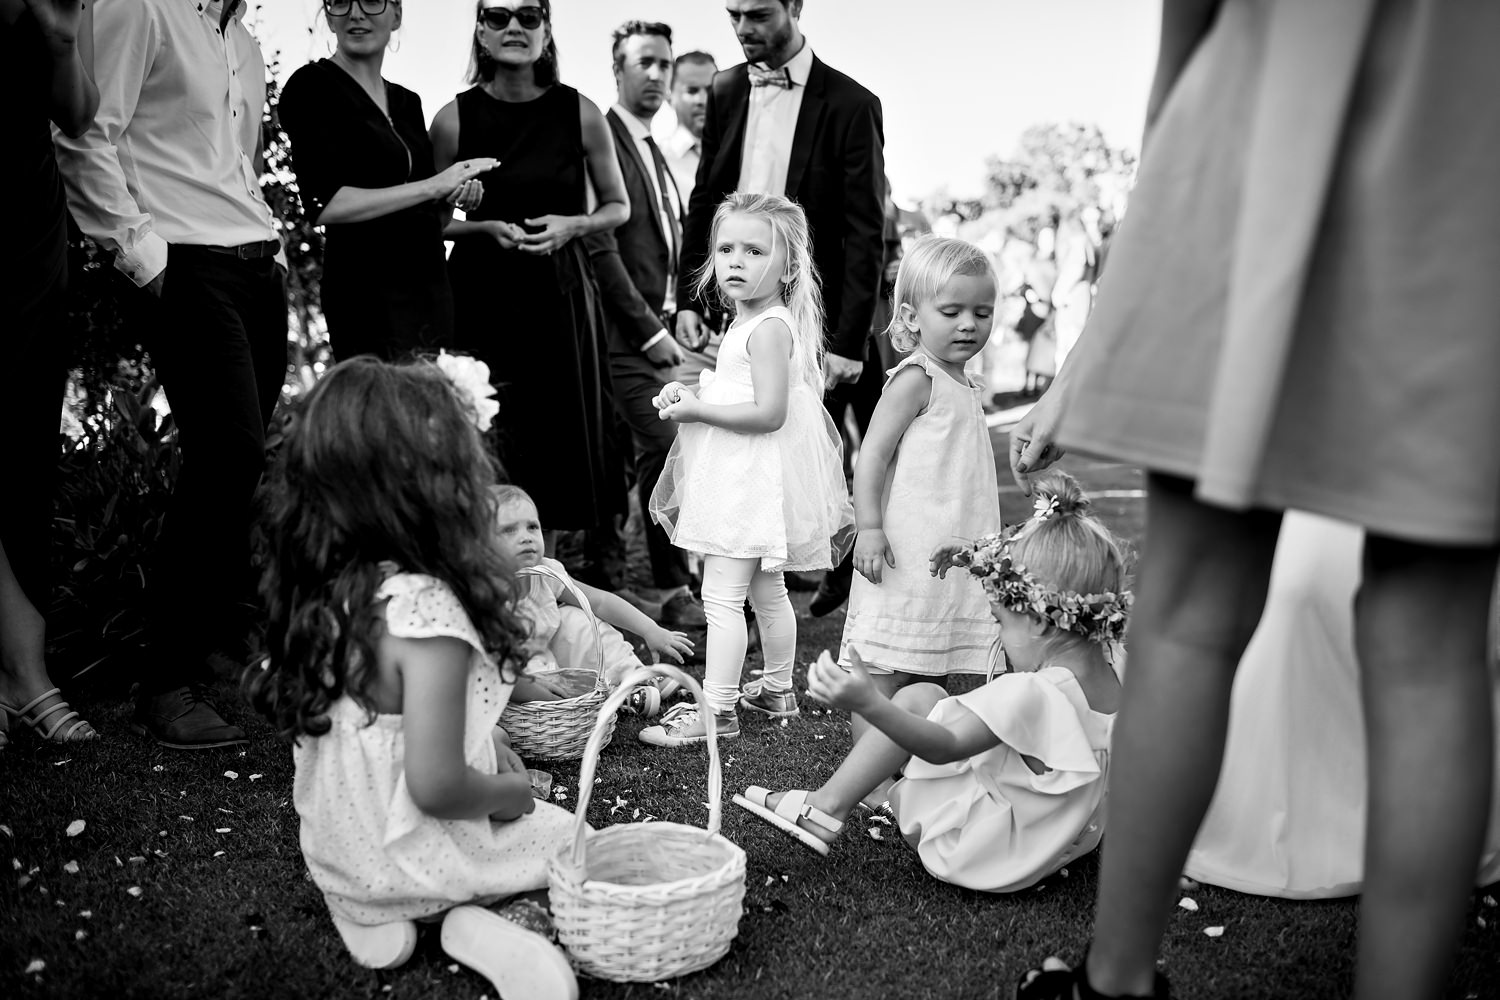 A group of flowergirls with baskets gather together amongst the guests and pick up petals to play with by wedding photographer in South Africa, Niki M Photography